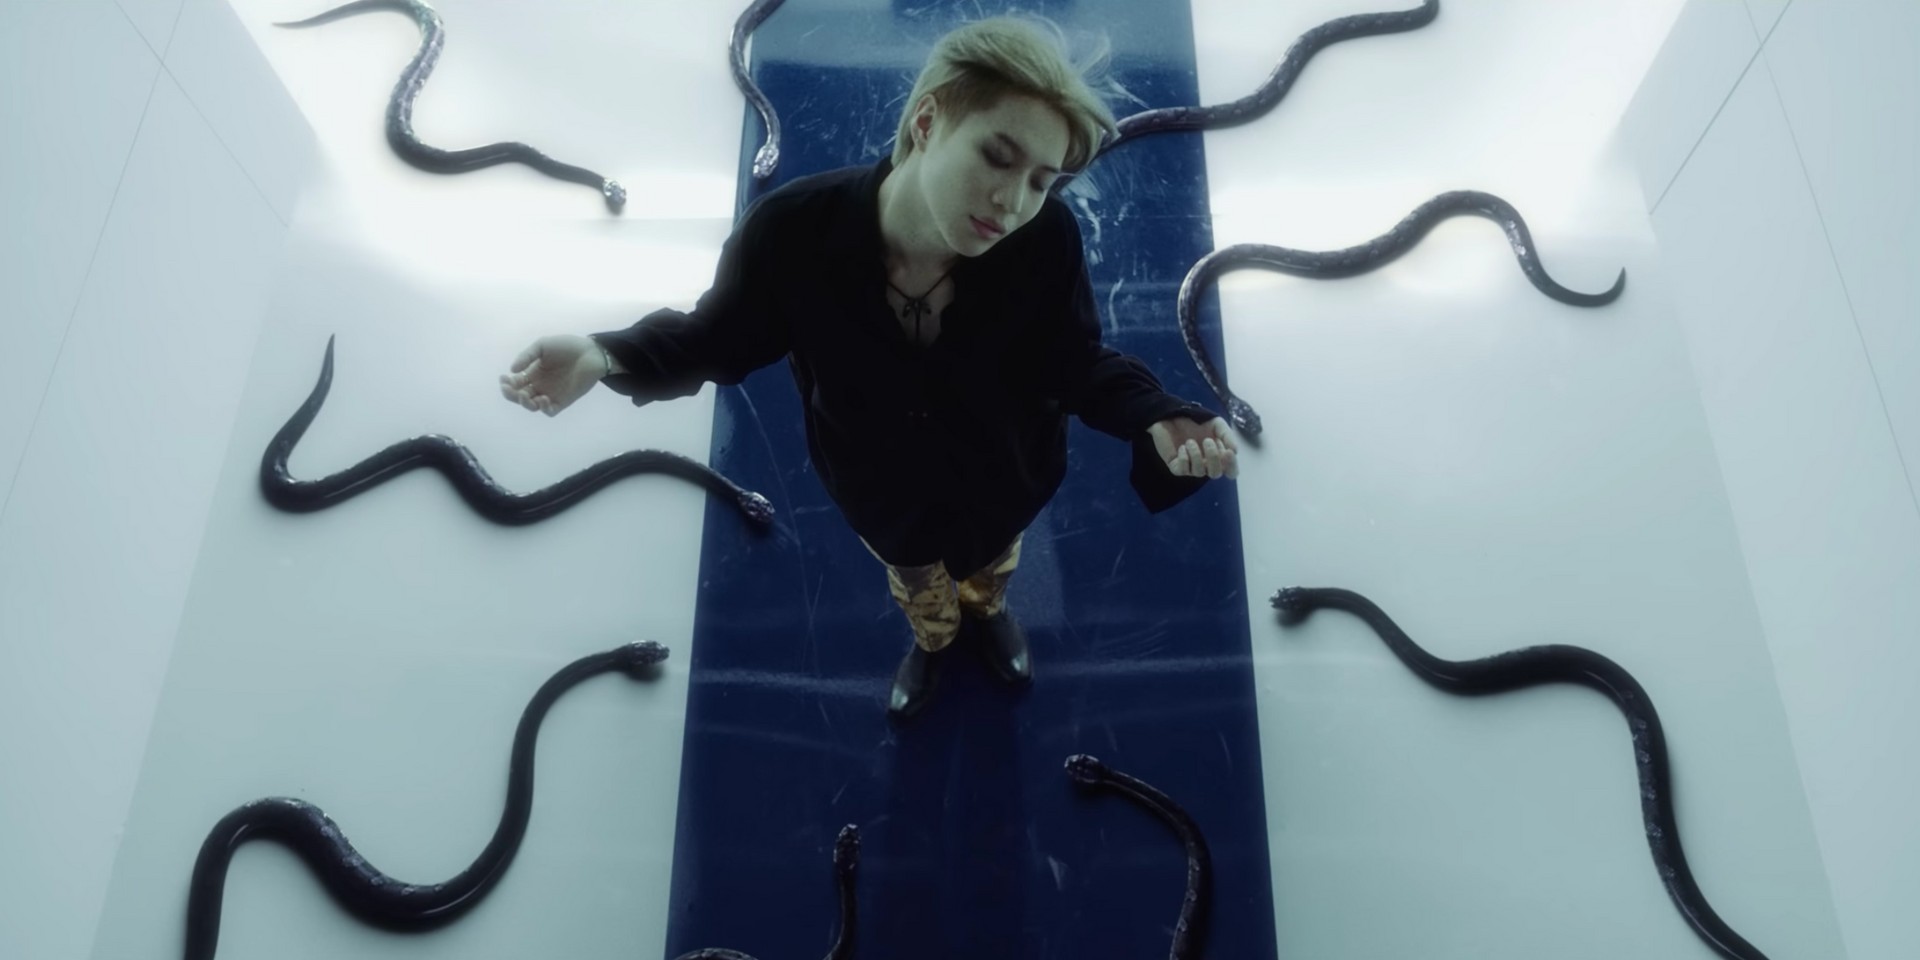 SHINee's Taemin releases visually stunning music video for new song 'WANT'